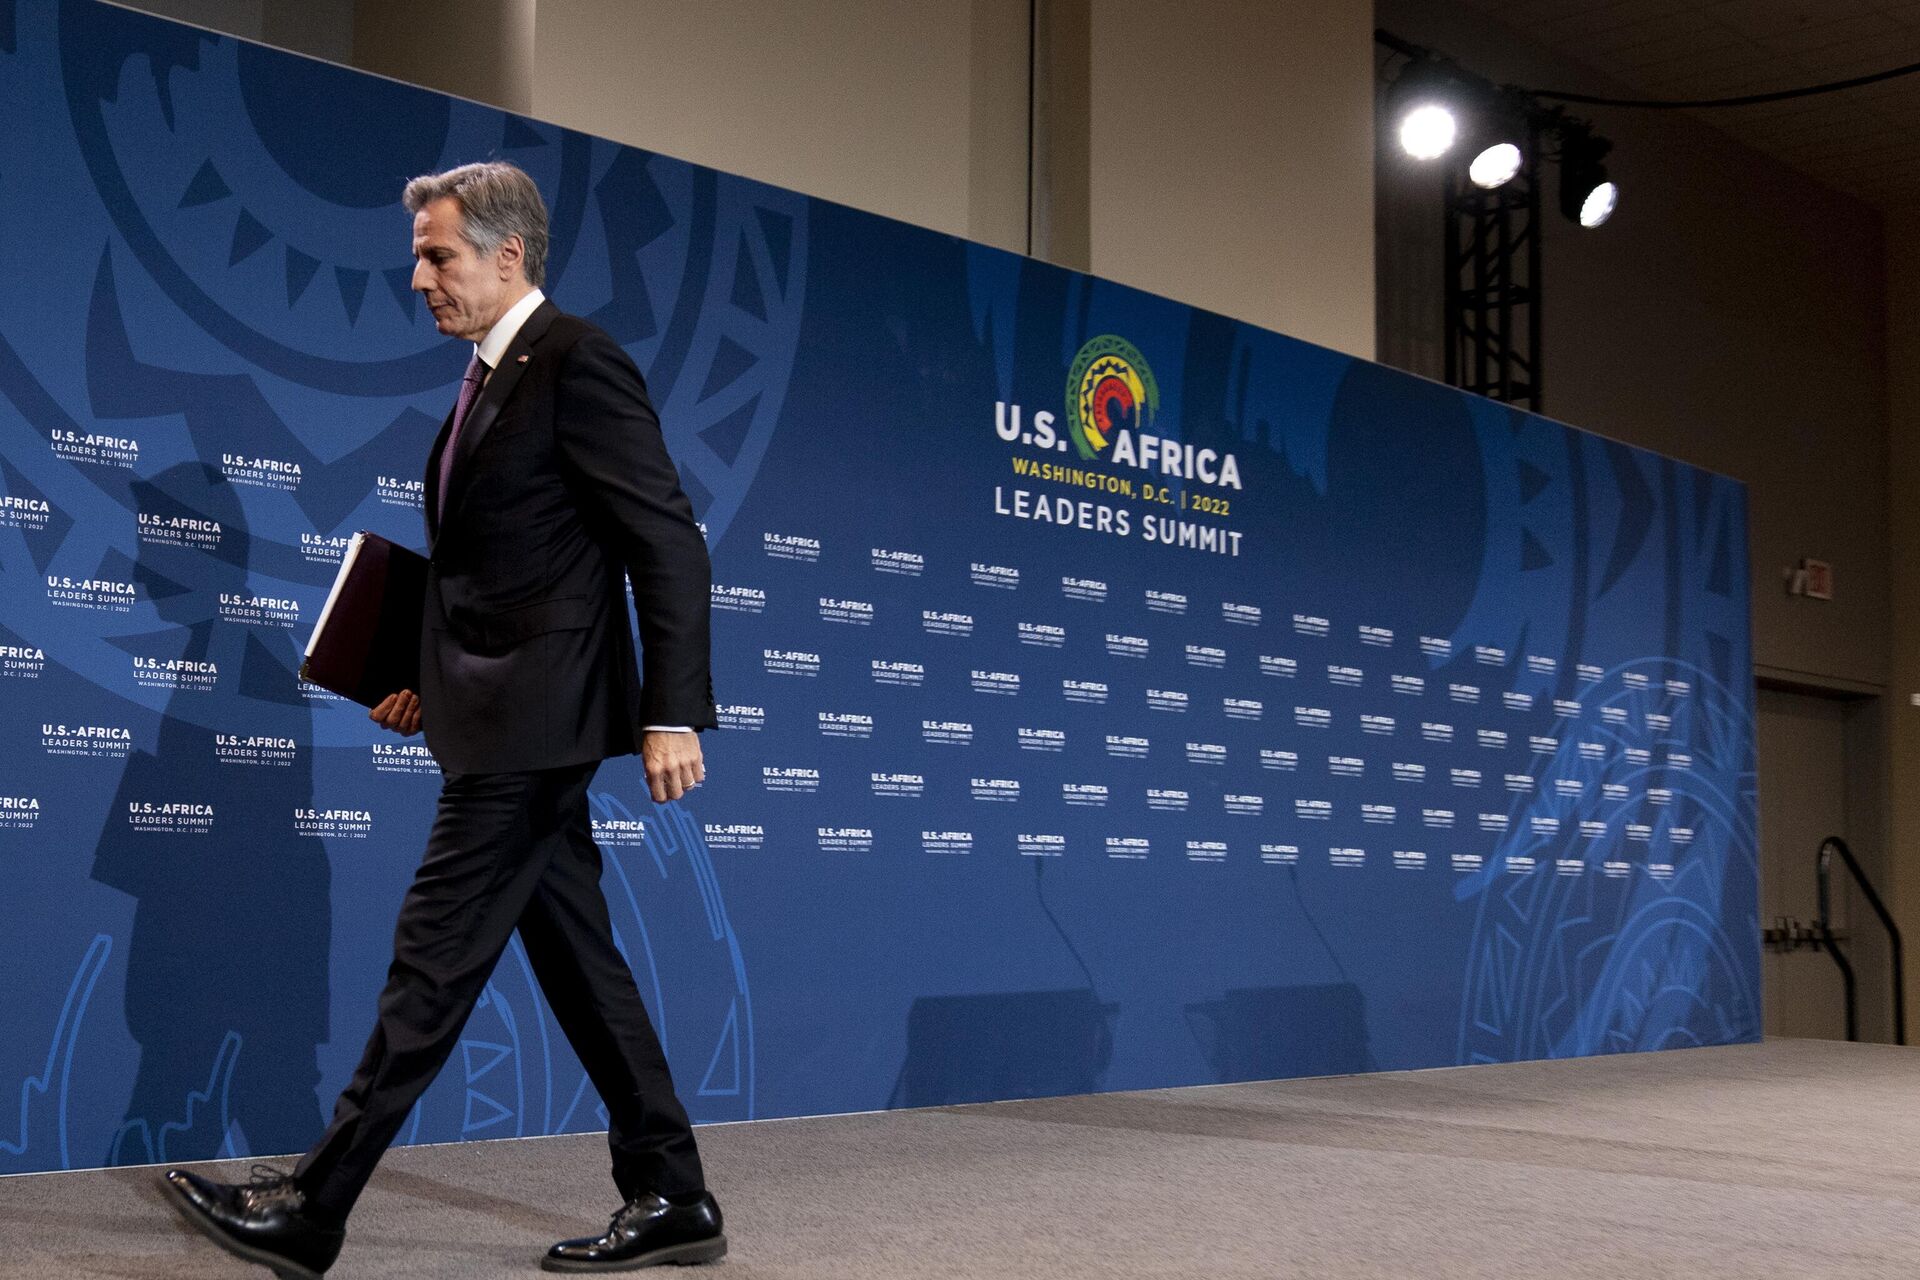 Secretary of State Antony Blinken departs a news conference at a U.S. Africa Leaders Summit at the Walter E. Washington Convention Center in Washington, Thursday, Dec. 15, 2022.  - Sputnik International, 1920, 23.04.2023